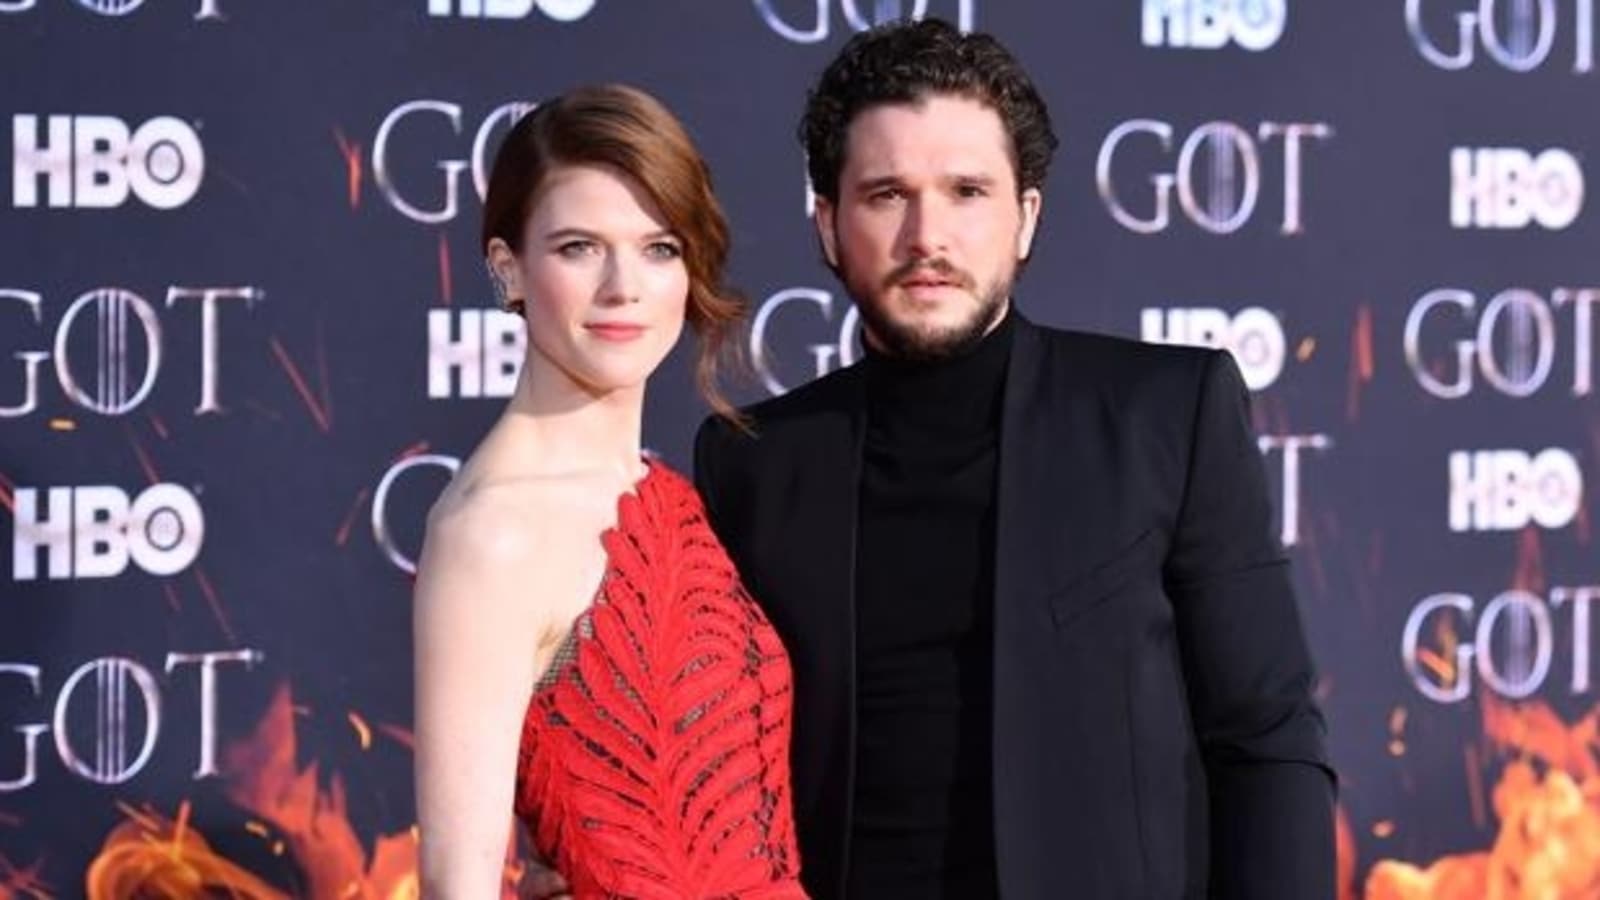 Game Of Thrones actors Kit Harington and Rose Leslie expecting second child